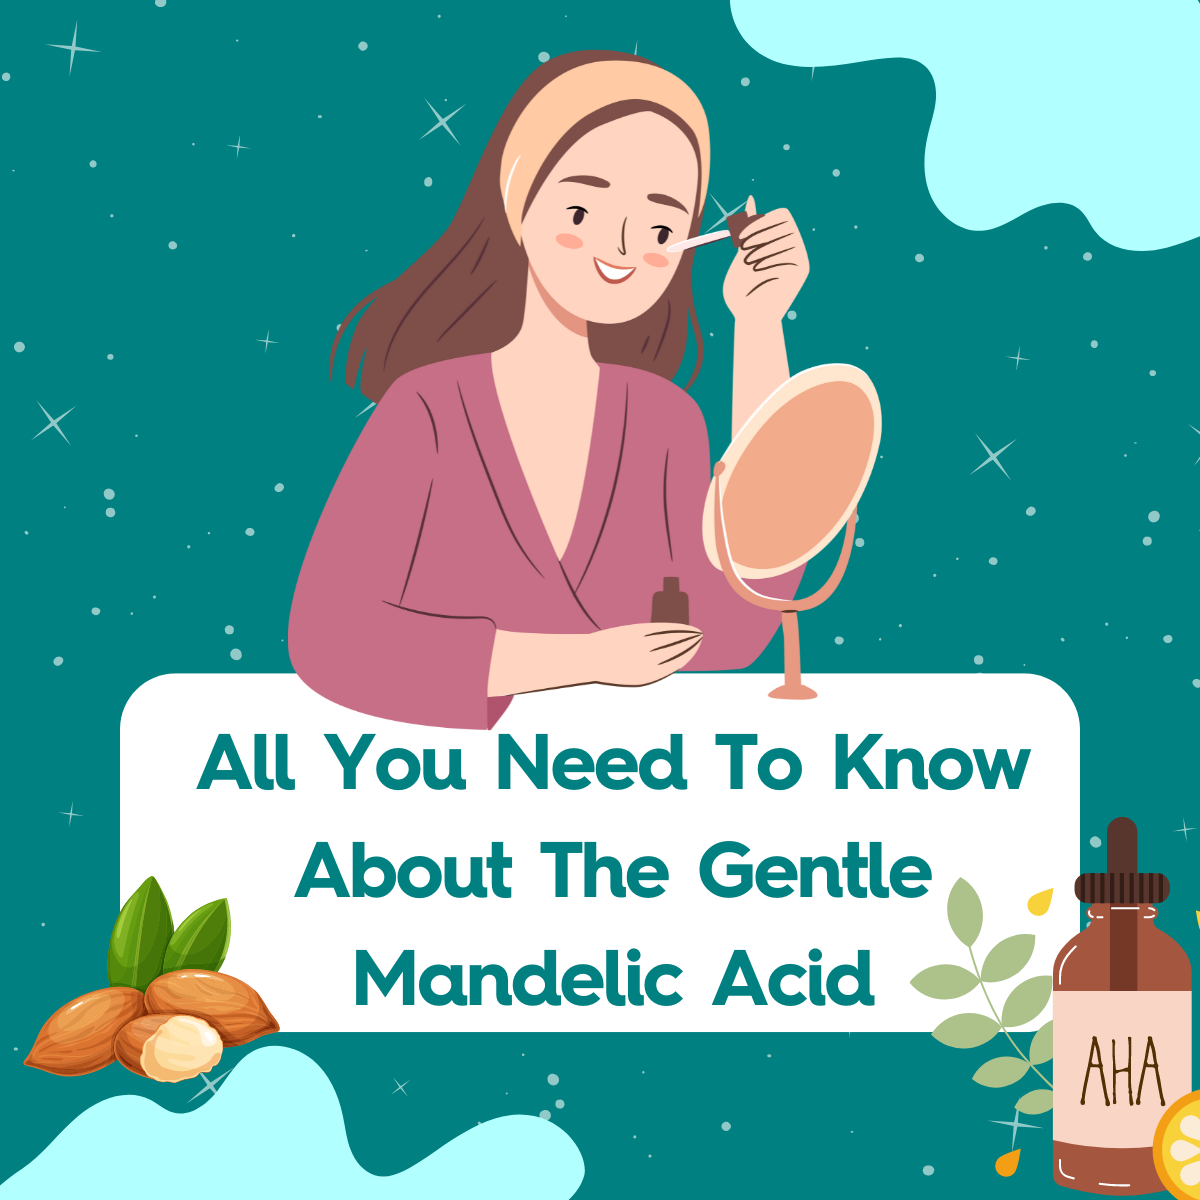 All You Need To Know About Gentle Mandelic Acid